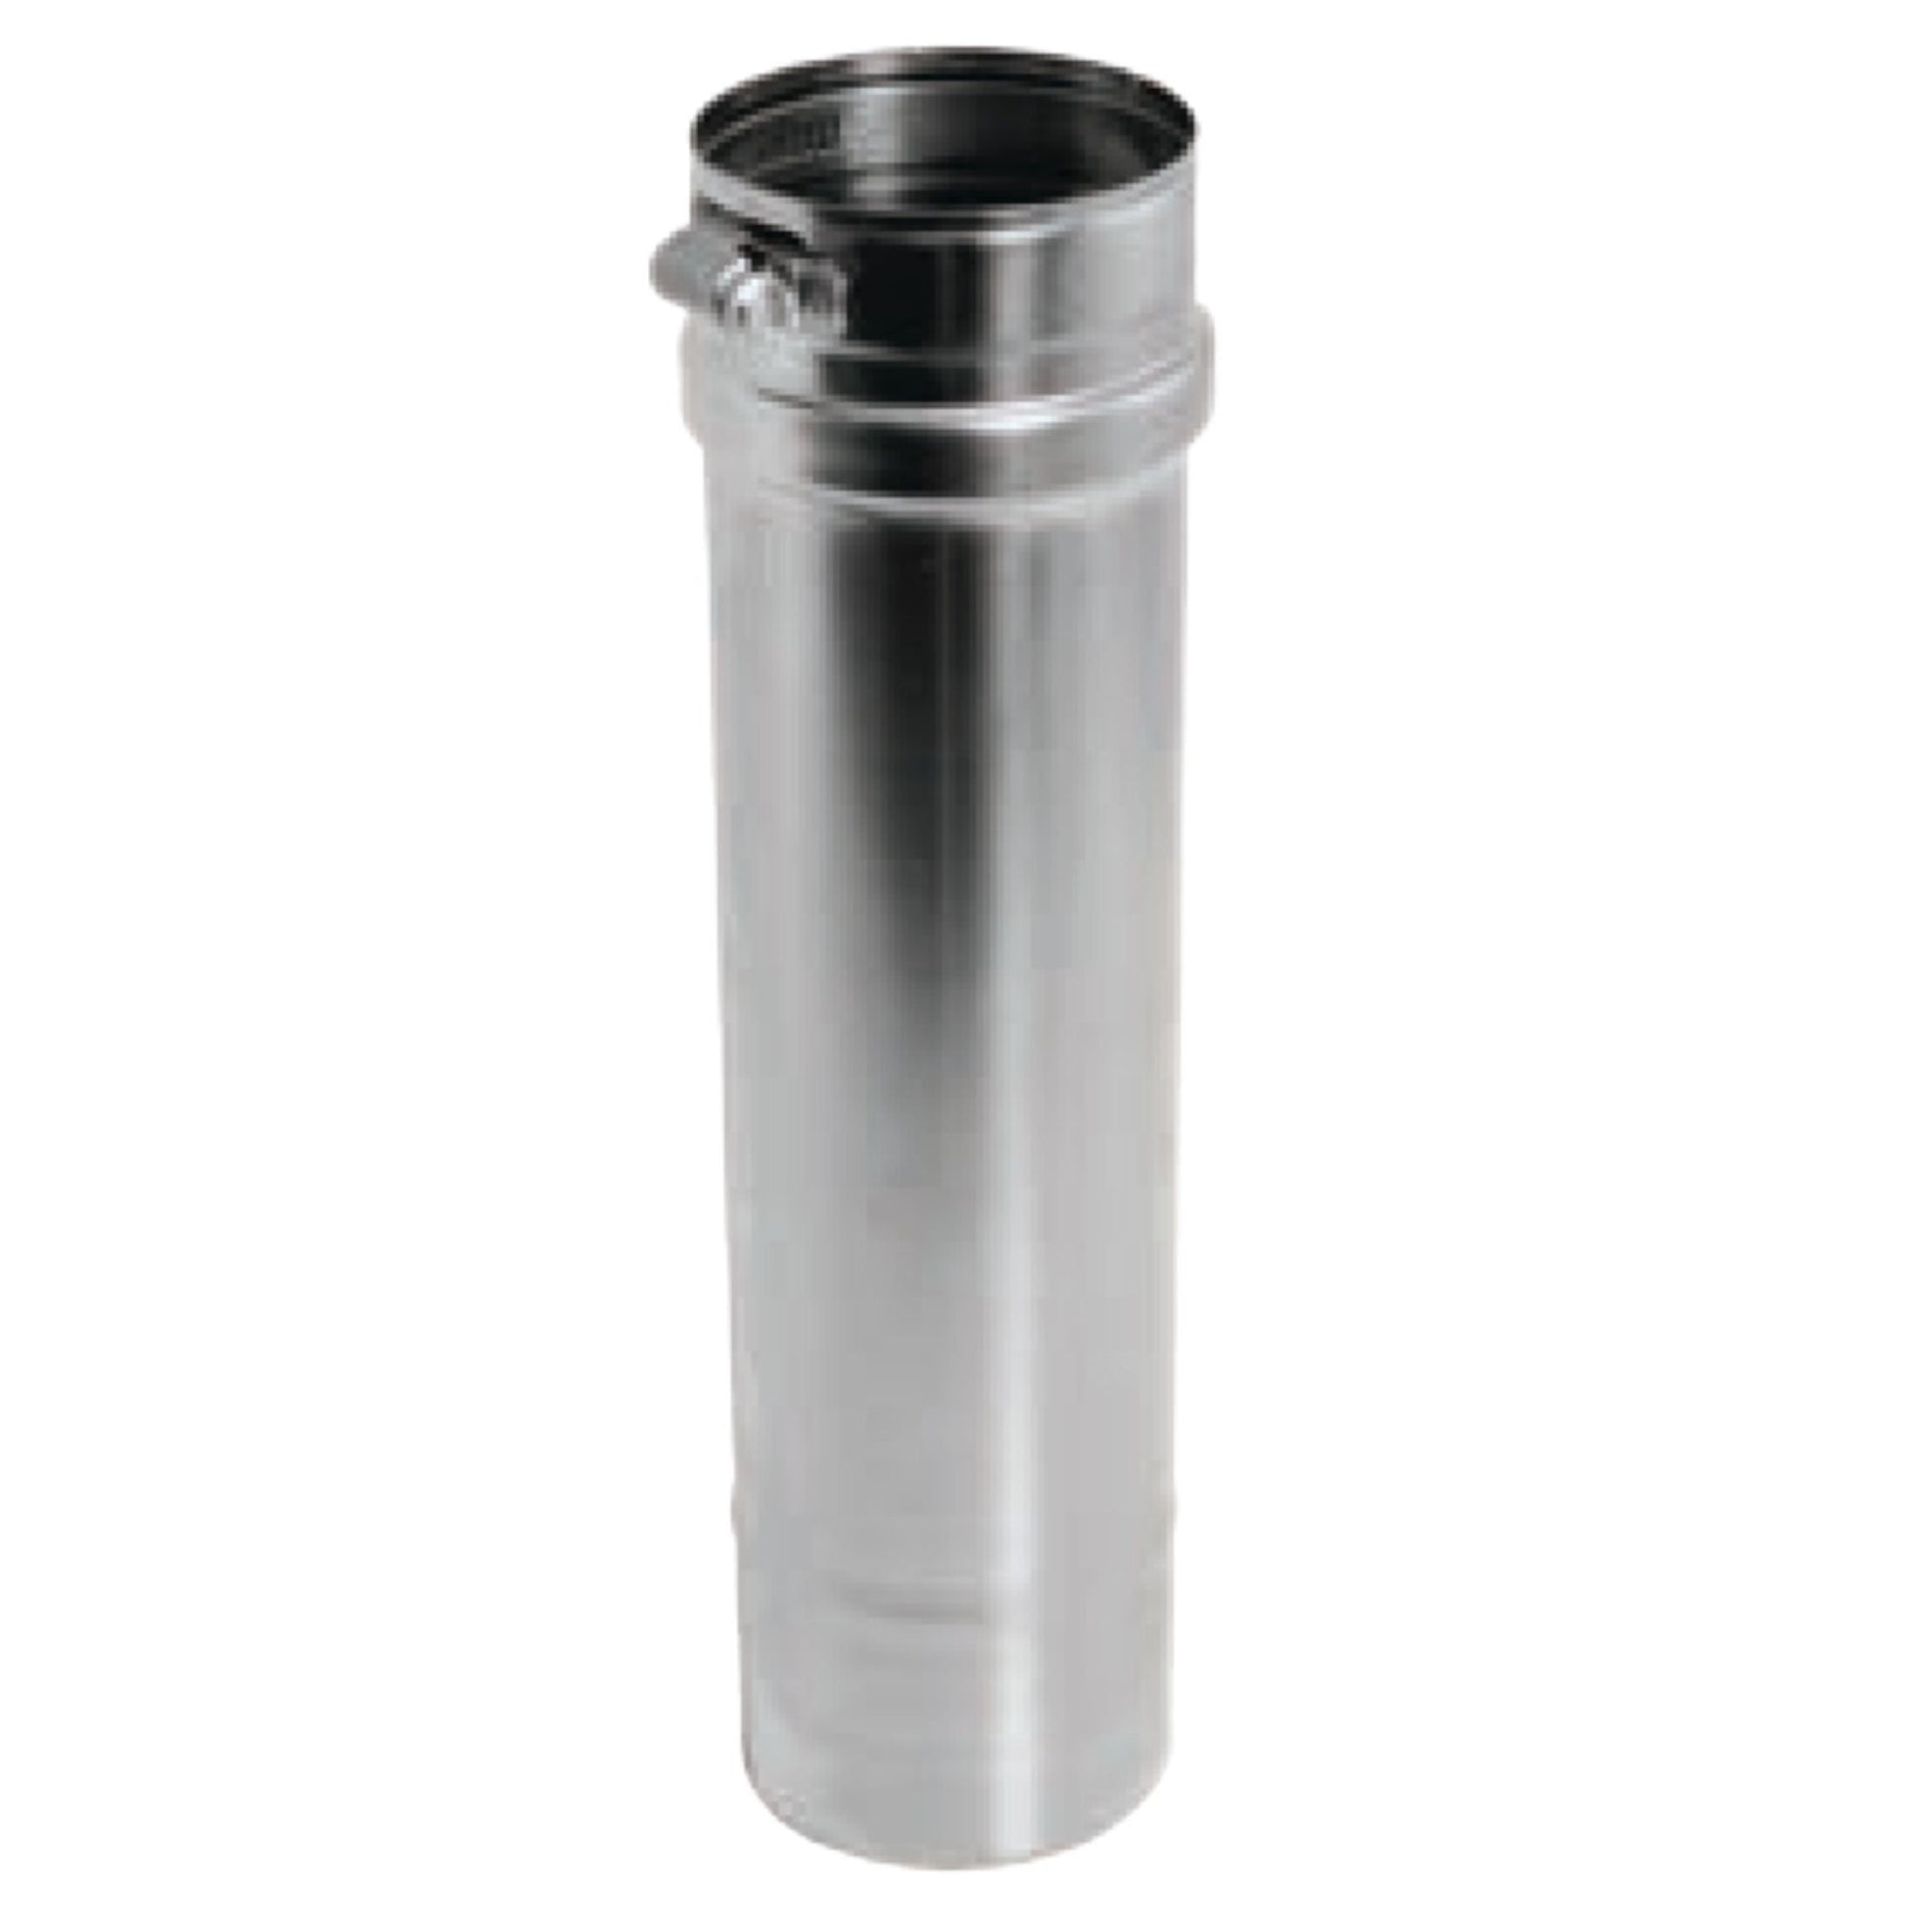 DuraVent FasNSeal 7" x 12" 316L Stainless Steel Vent Length